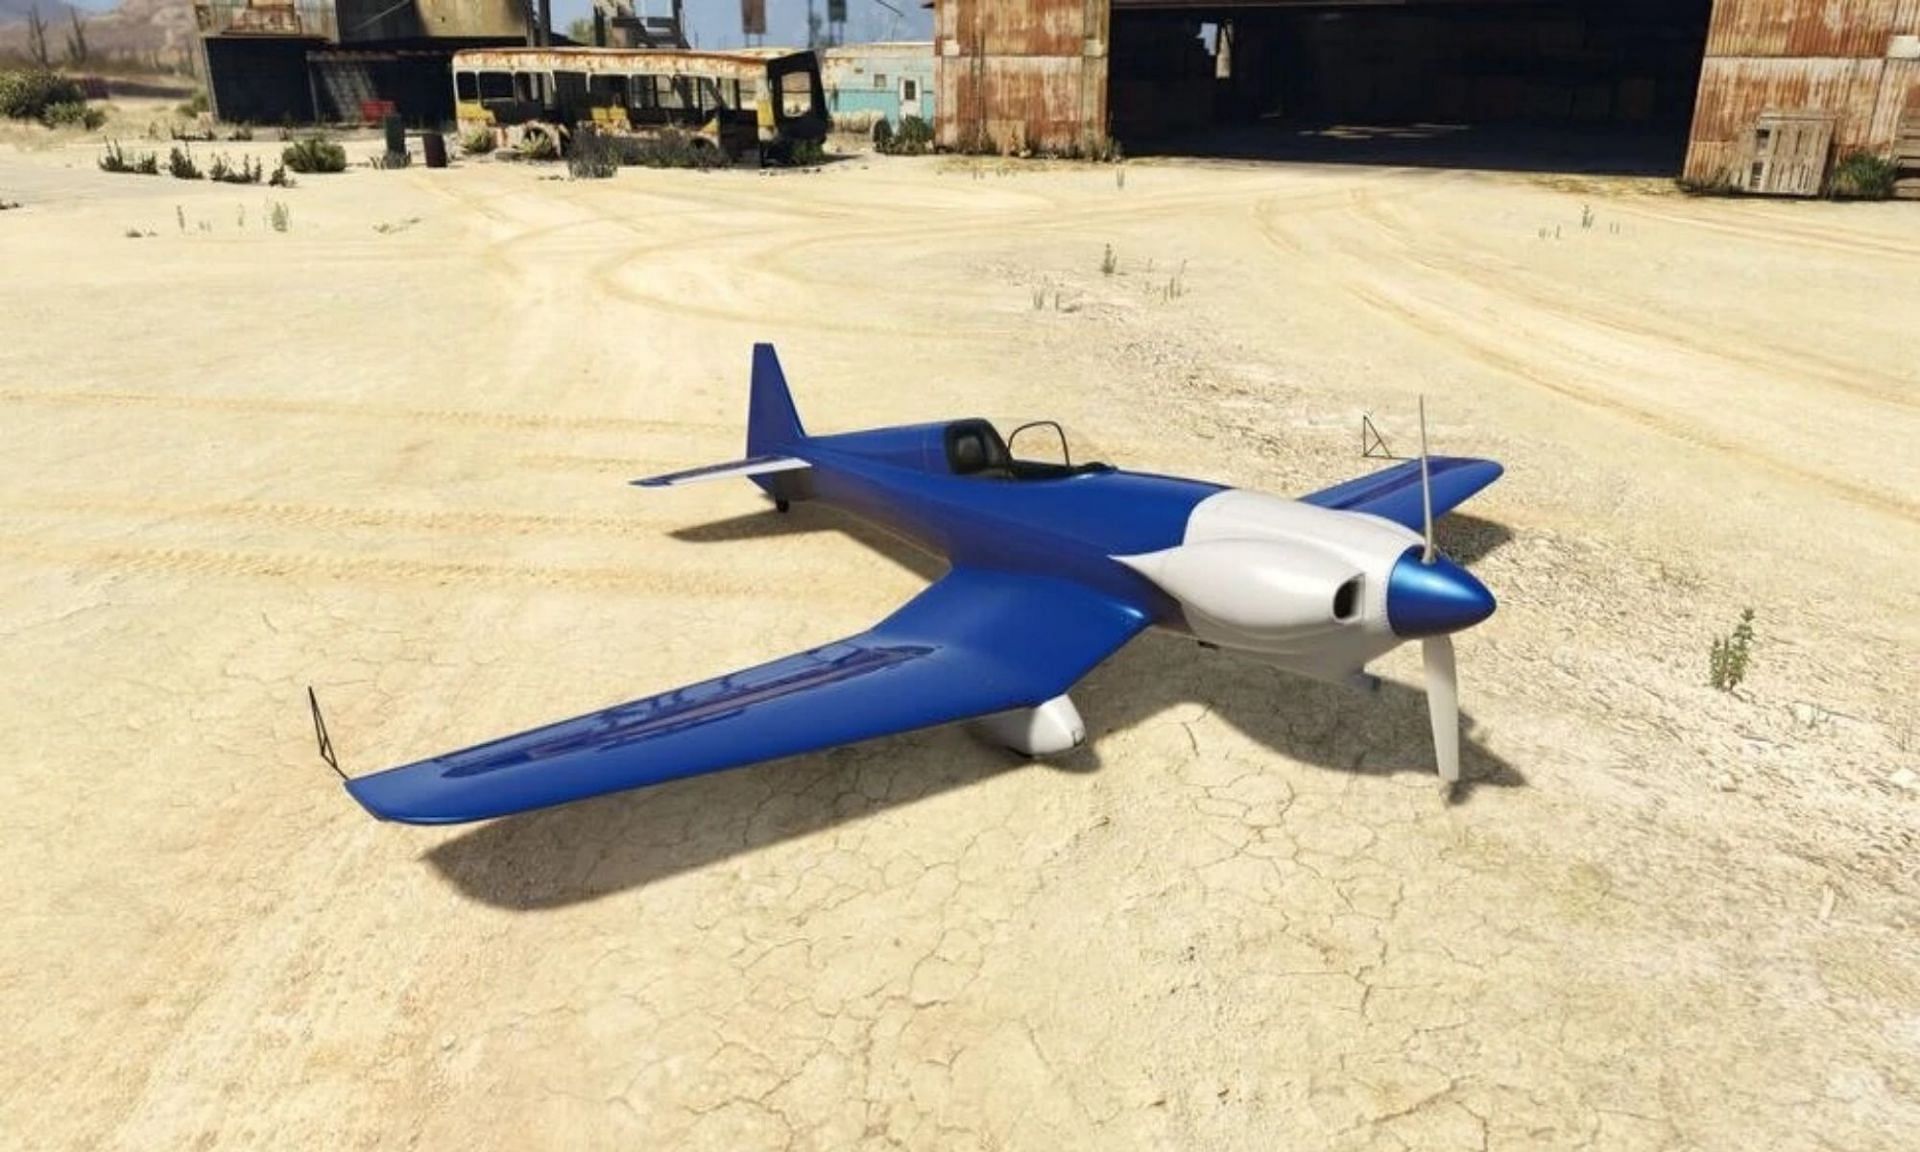 Rockstar describes this plane as having &quot;routinely fatal&quot; top speed